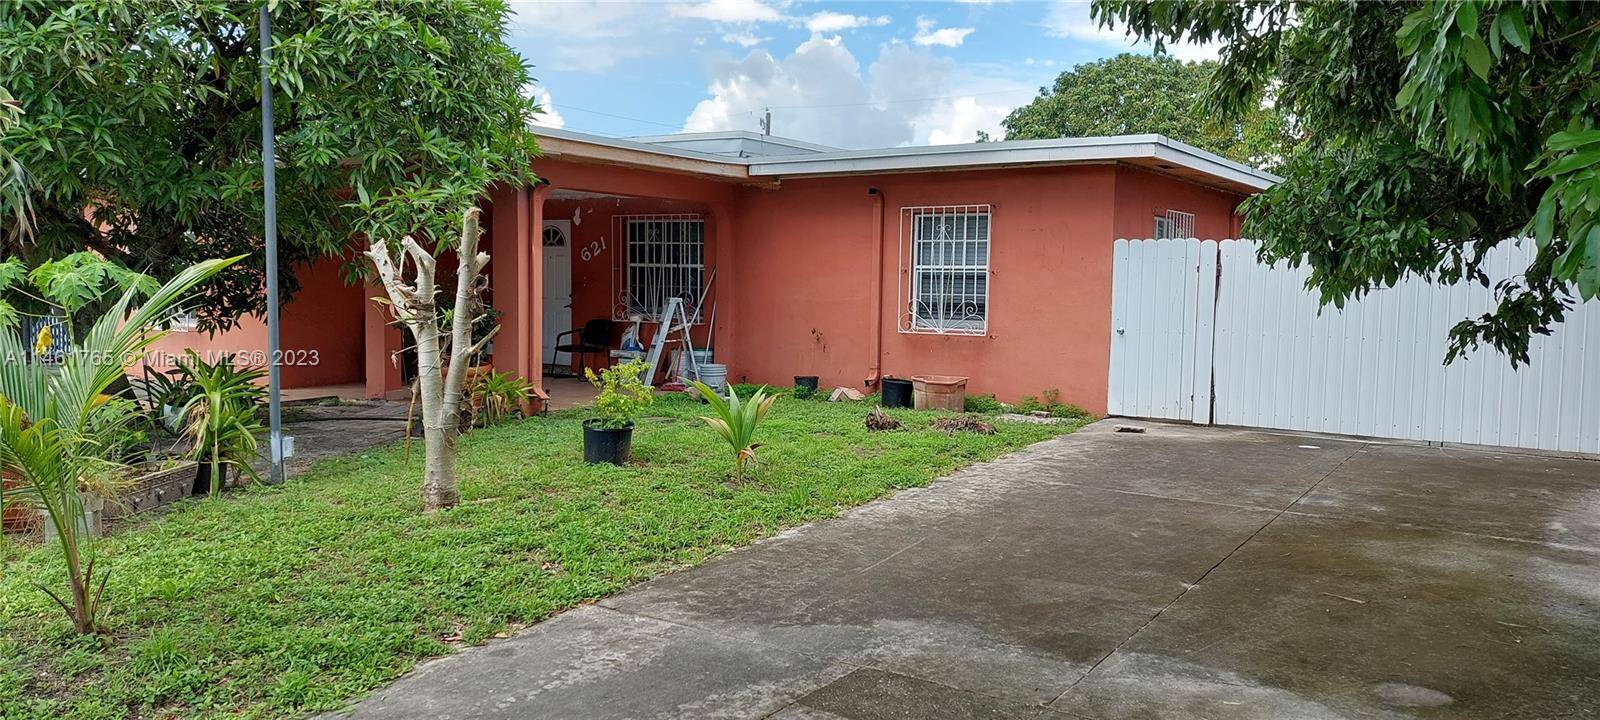 Ample house in Hialeah. Centrally located house near to everything hospitals, shopping centers, mall, expressways.